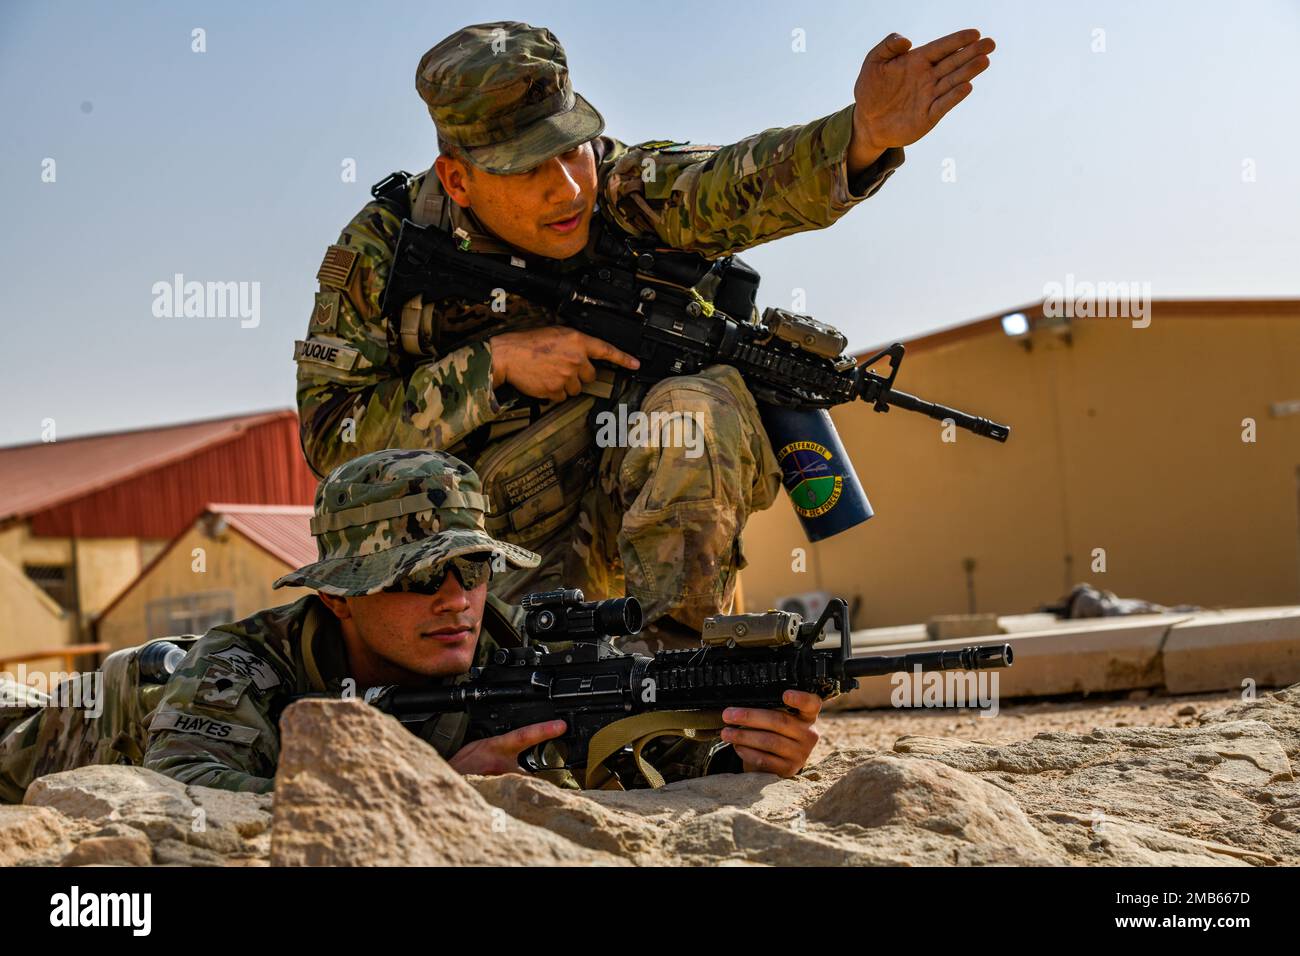 A U.S. Soldier assigned to Task Force Hurricane from the 1st Battalion, 124th Infantry Regiment, assigns his comrades a security area during a platoon immersion in Al-Kharj, Kingdom of Saudi Arabia, June 12, 2022. The immersion was a training event meant to build interoperability between the U.S Army and Royal Saudi Land Force at the platoon level while enhancing both U.S. and partner nation skillsets. Stock Photo